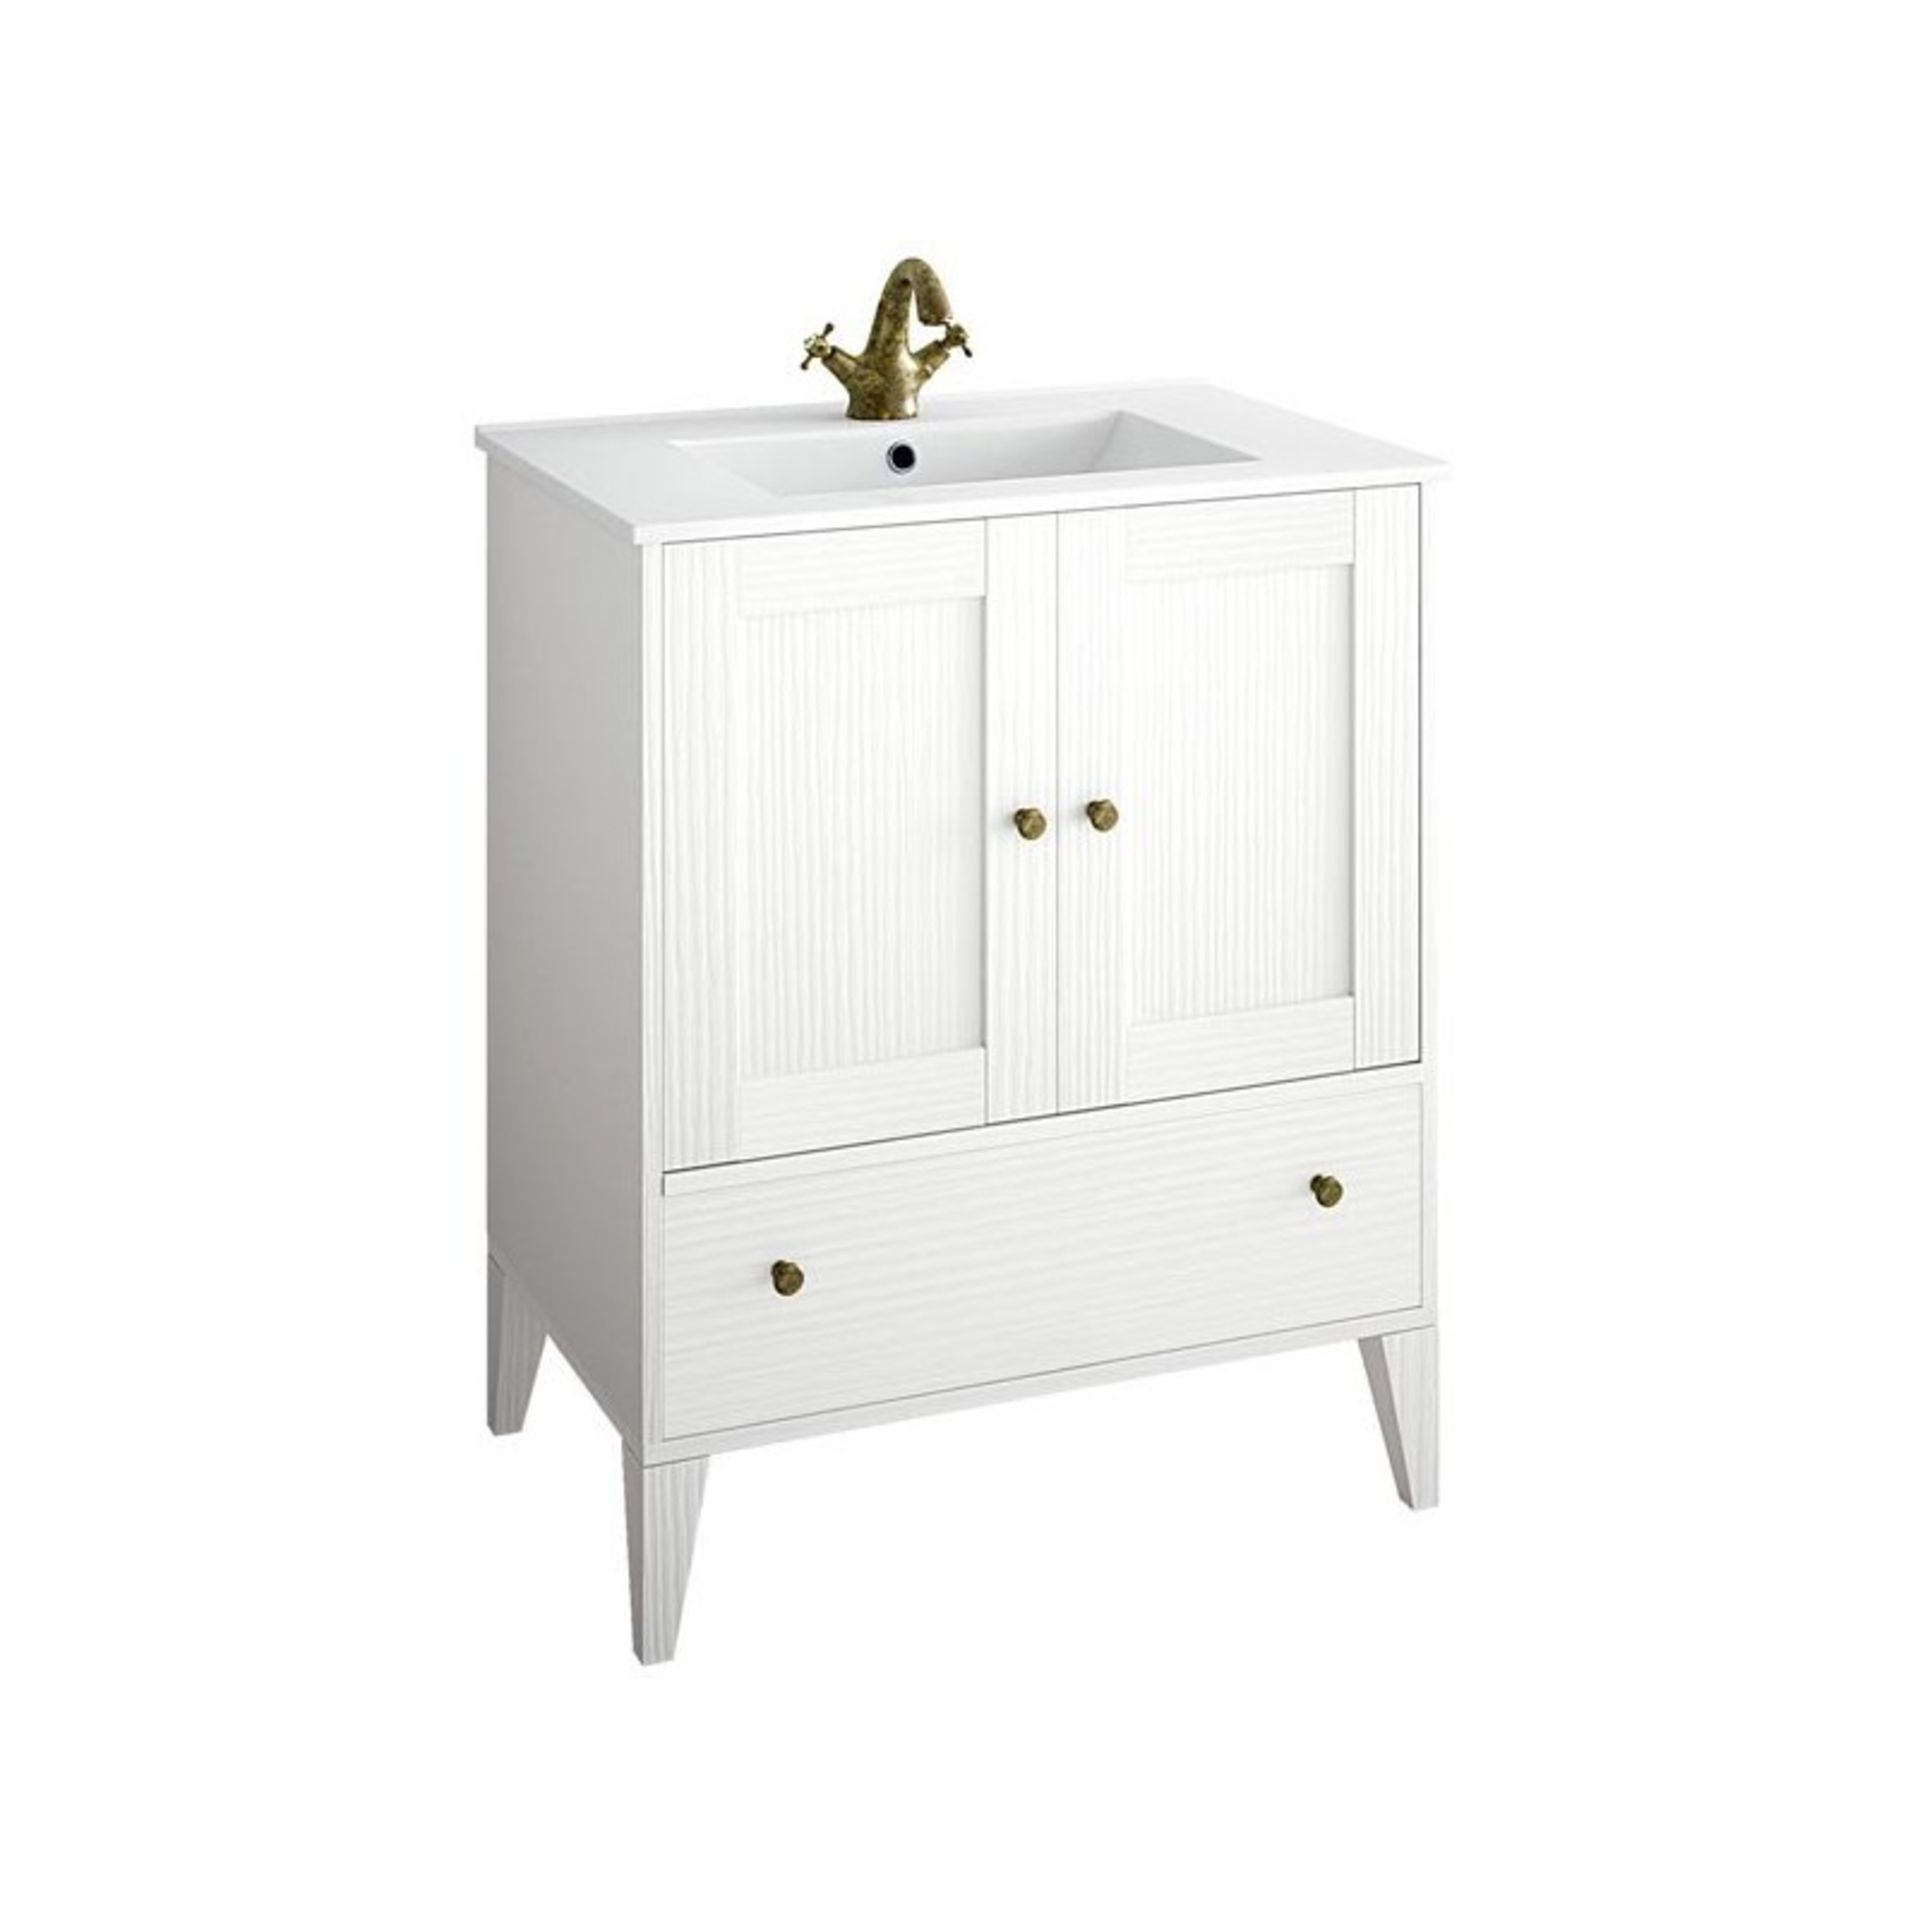 New & Boxed Croydex Chetsford Vanity Unit | Ws010822. The Croydex Chetsford Vanity Unit Is A